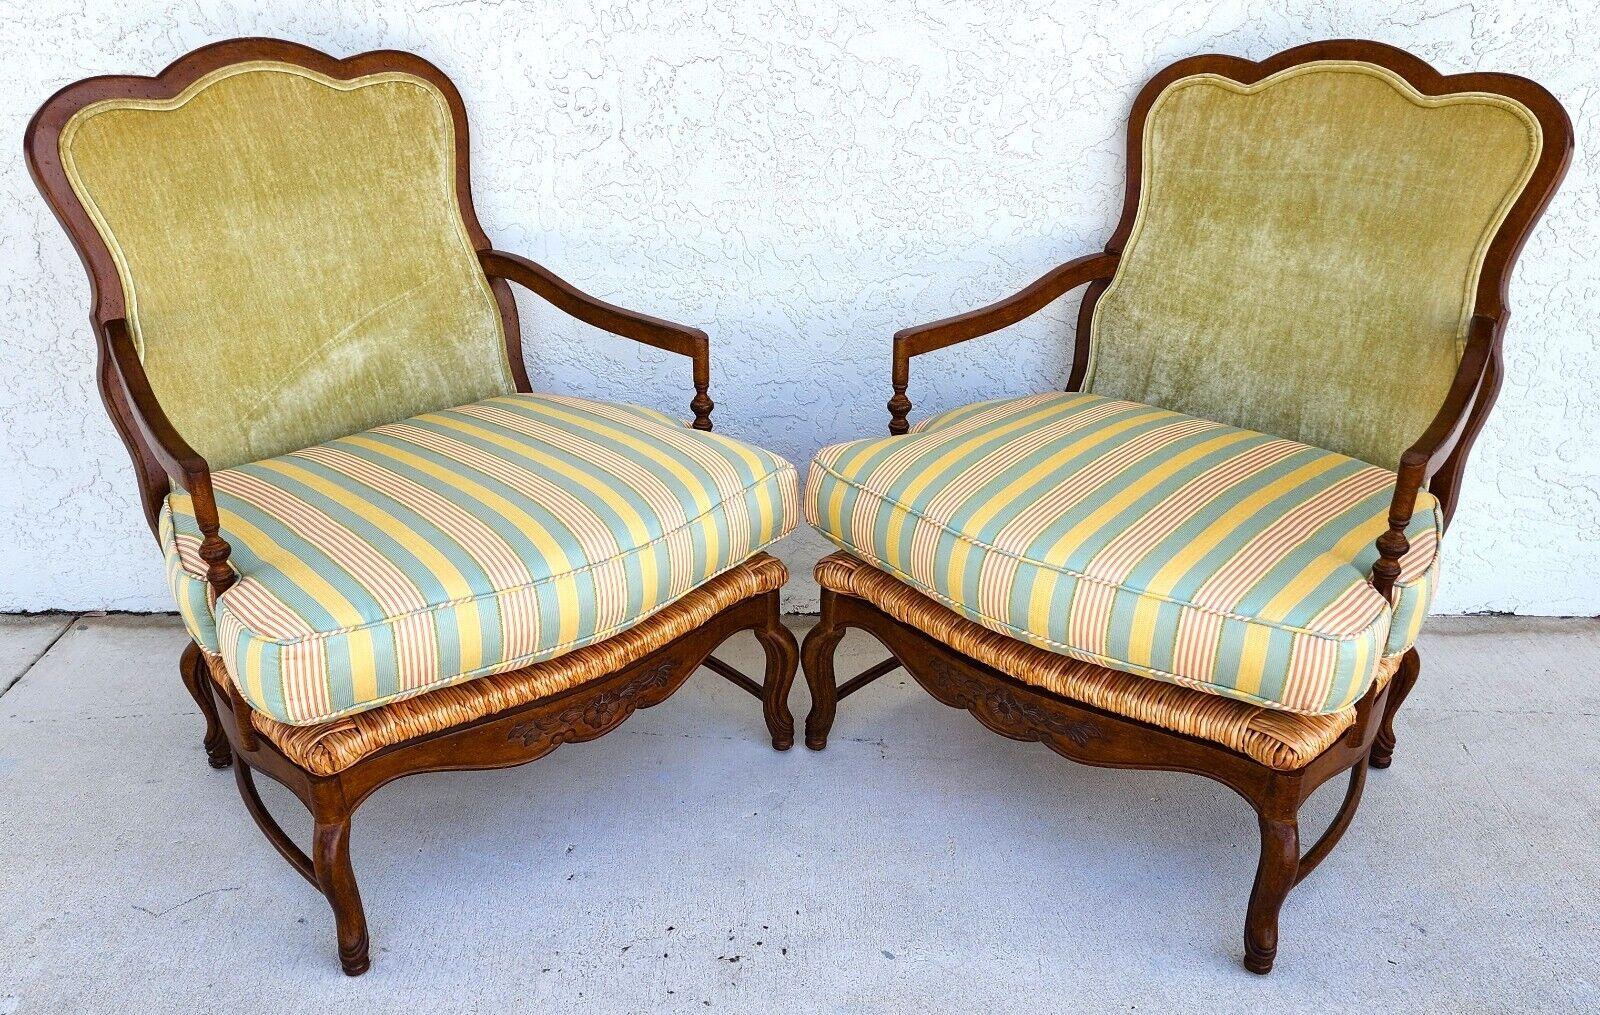 For FULL item description click on CONTINUE READING at the bottom of this page.

Offering One Of Our Recent Palm Beach Estate Fine Furniture Acquisitions Of A 
Pair of Vintage Country French Armchairs with Rush Seats

Approximate Measurements